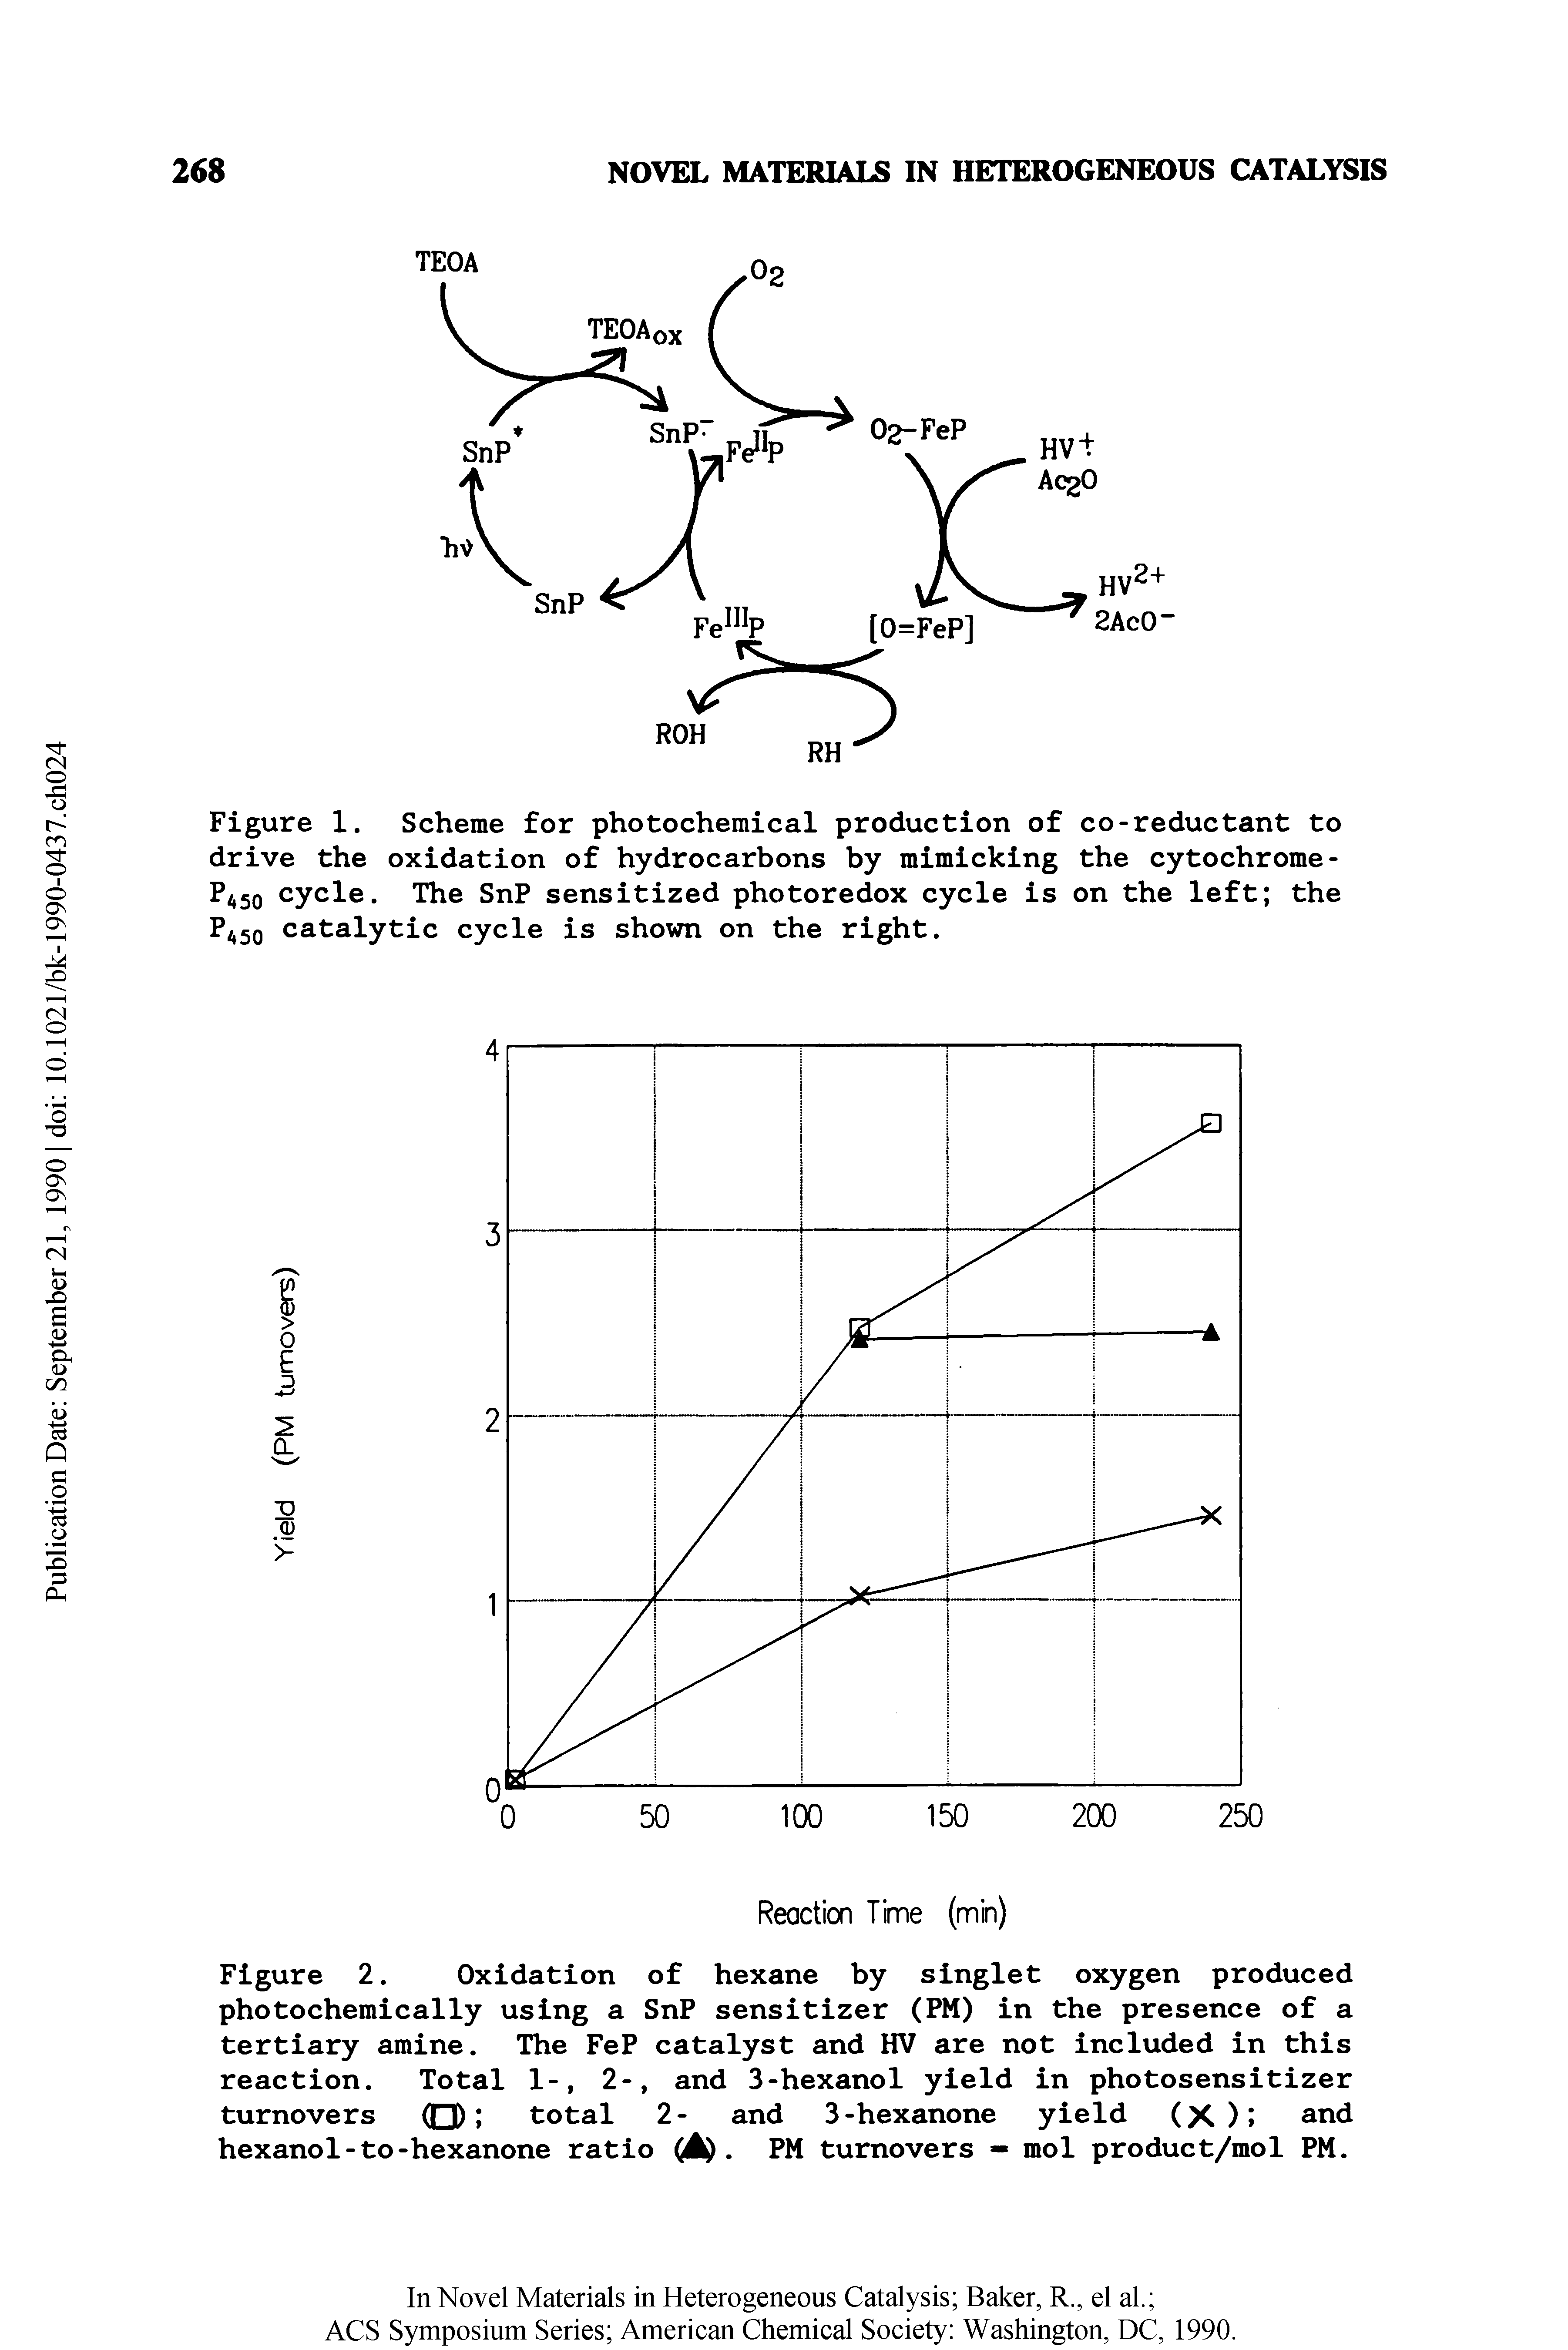 Figure 2. Oxidation of hexane by singlet oxygen produced photochemically using a SnP sensitizer (PM) in the presence of a tertiary amine. The FeP catalyst and HV are not included in this reaction. Total 1-, 2-, and 3-hexanol yield in photosensitizer turnovers O total 2- and 3-hexanone yield (X)l hexanol-to-hexanone ratio (A. PM turnovers - mol product/mol PM.